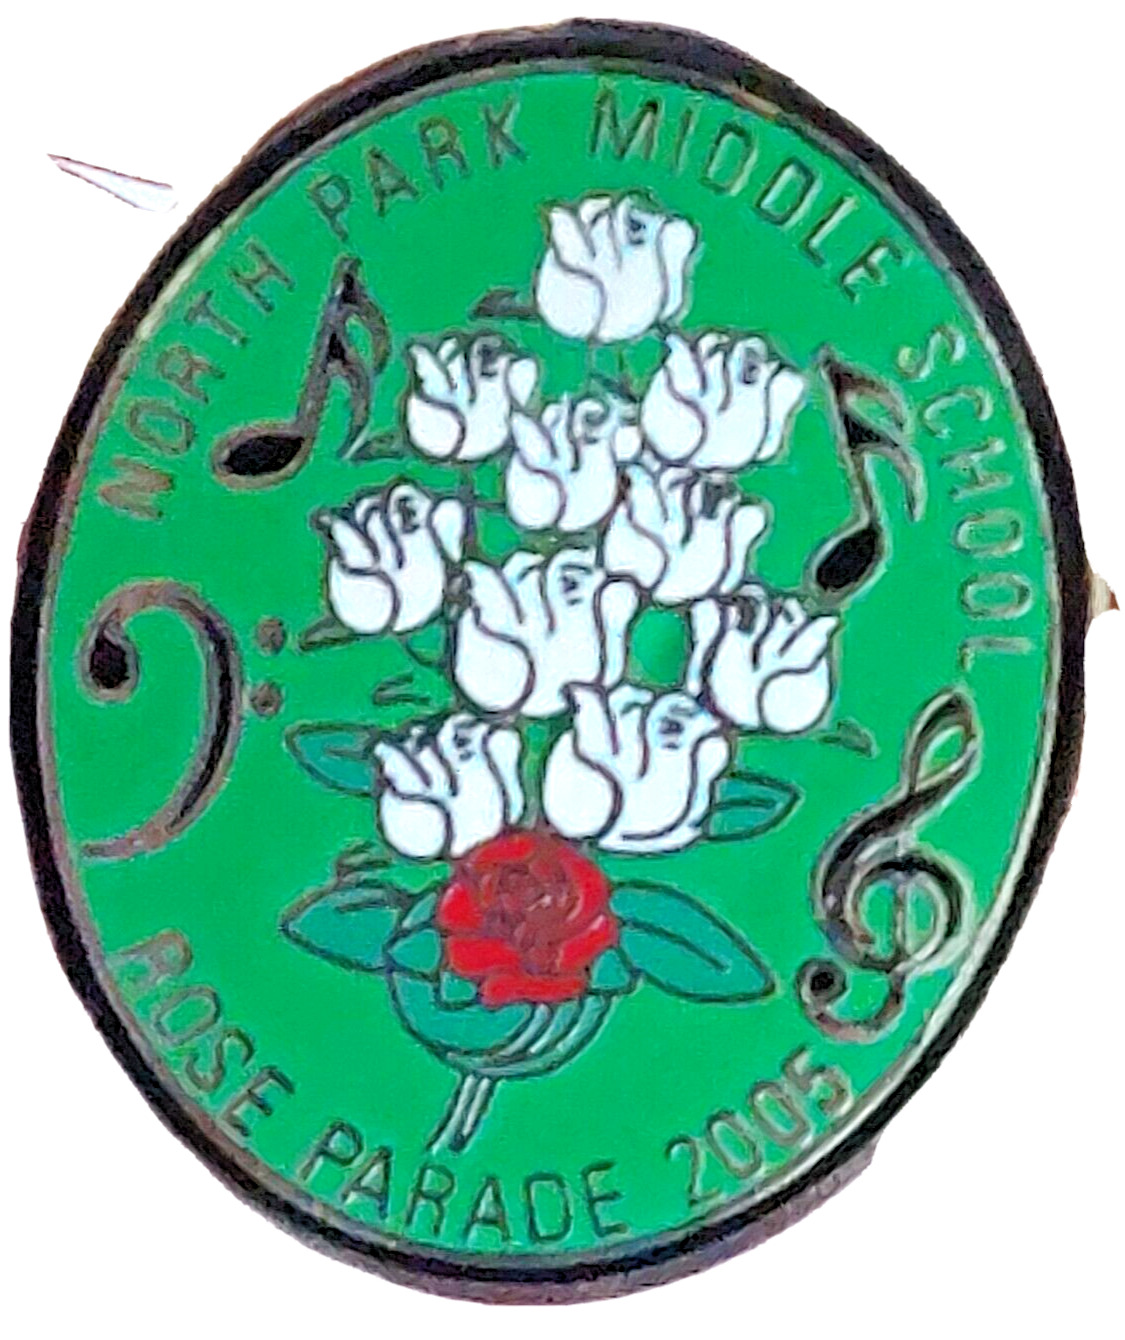 Rose Parade 2005 NORTH PARK MIDDLE SCHOOL Lapel Pin (062723)